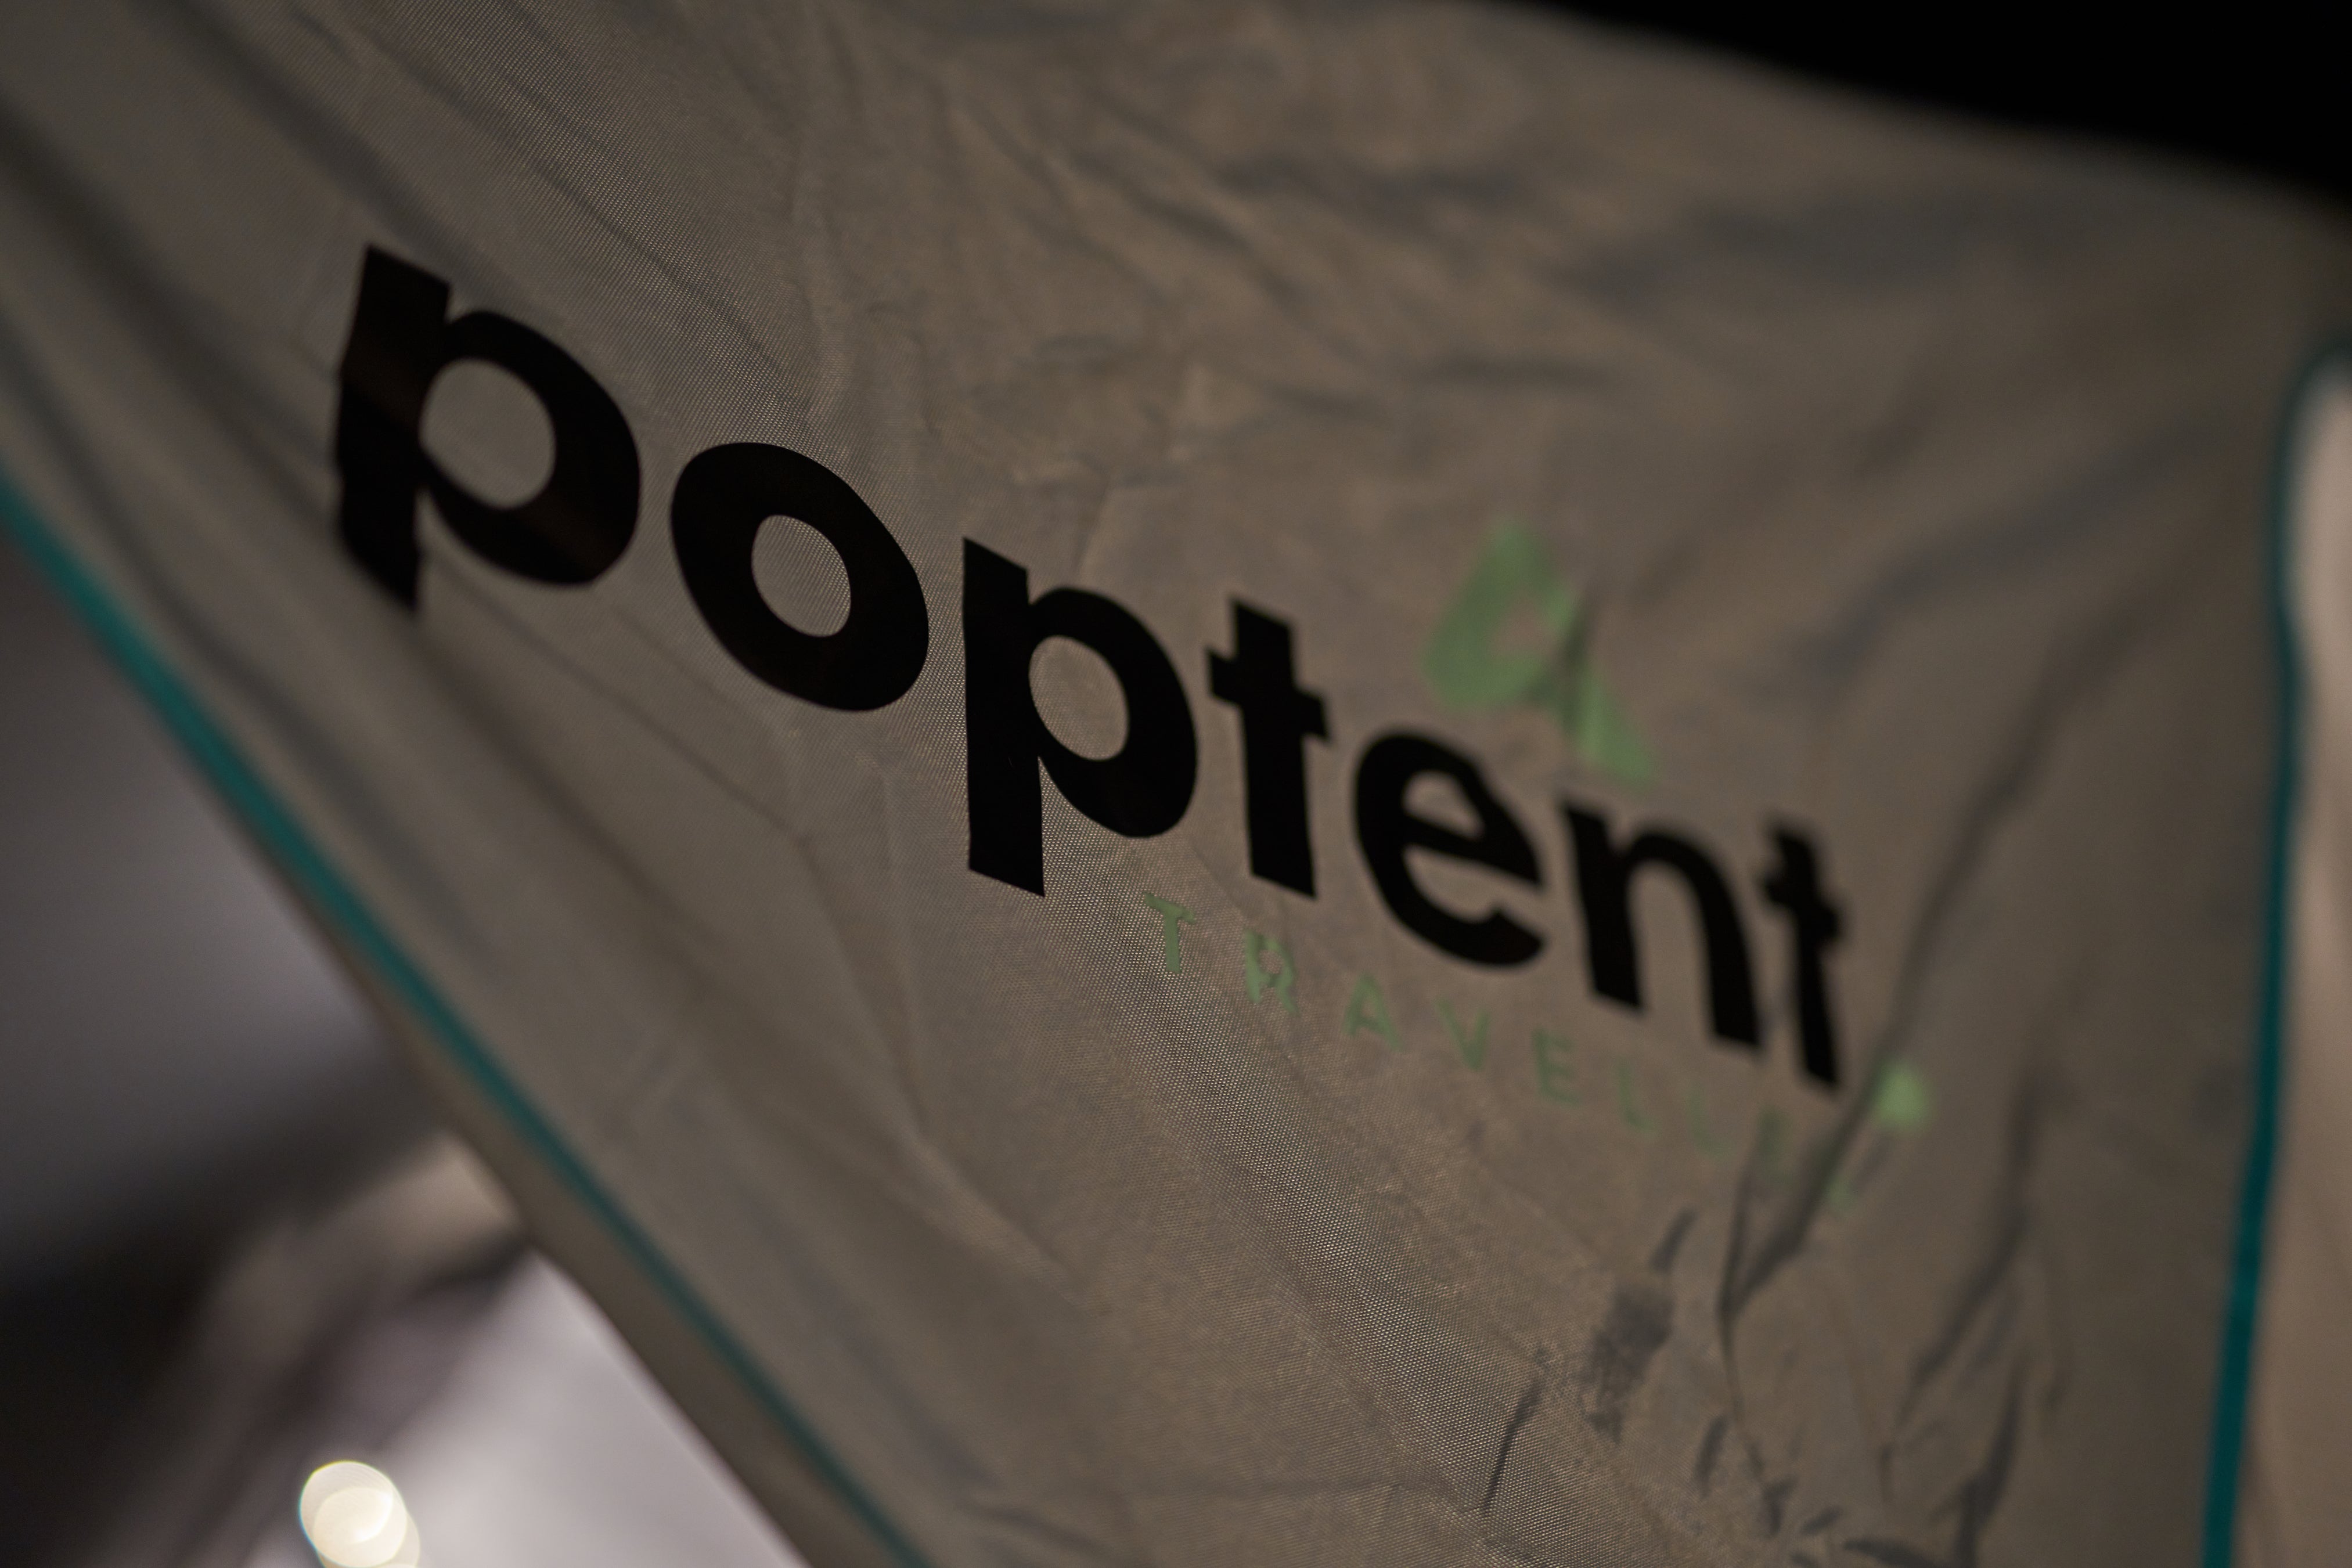 Where shall I take my PopTent?